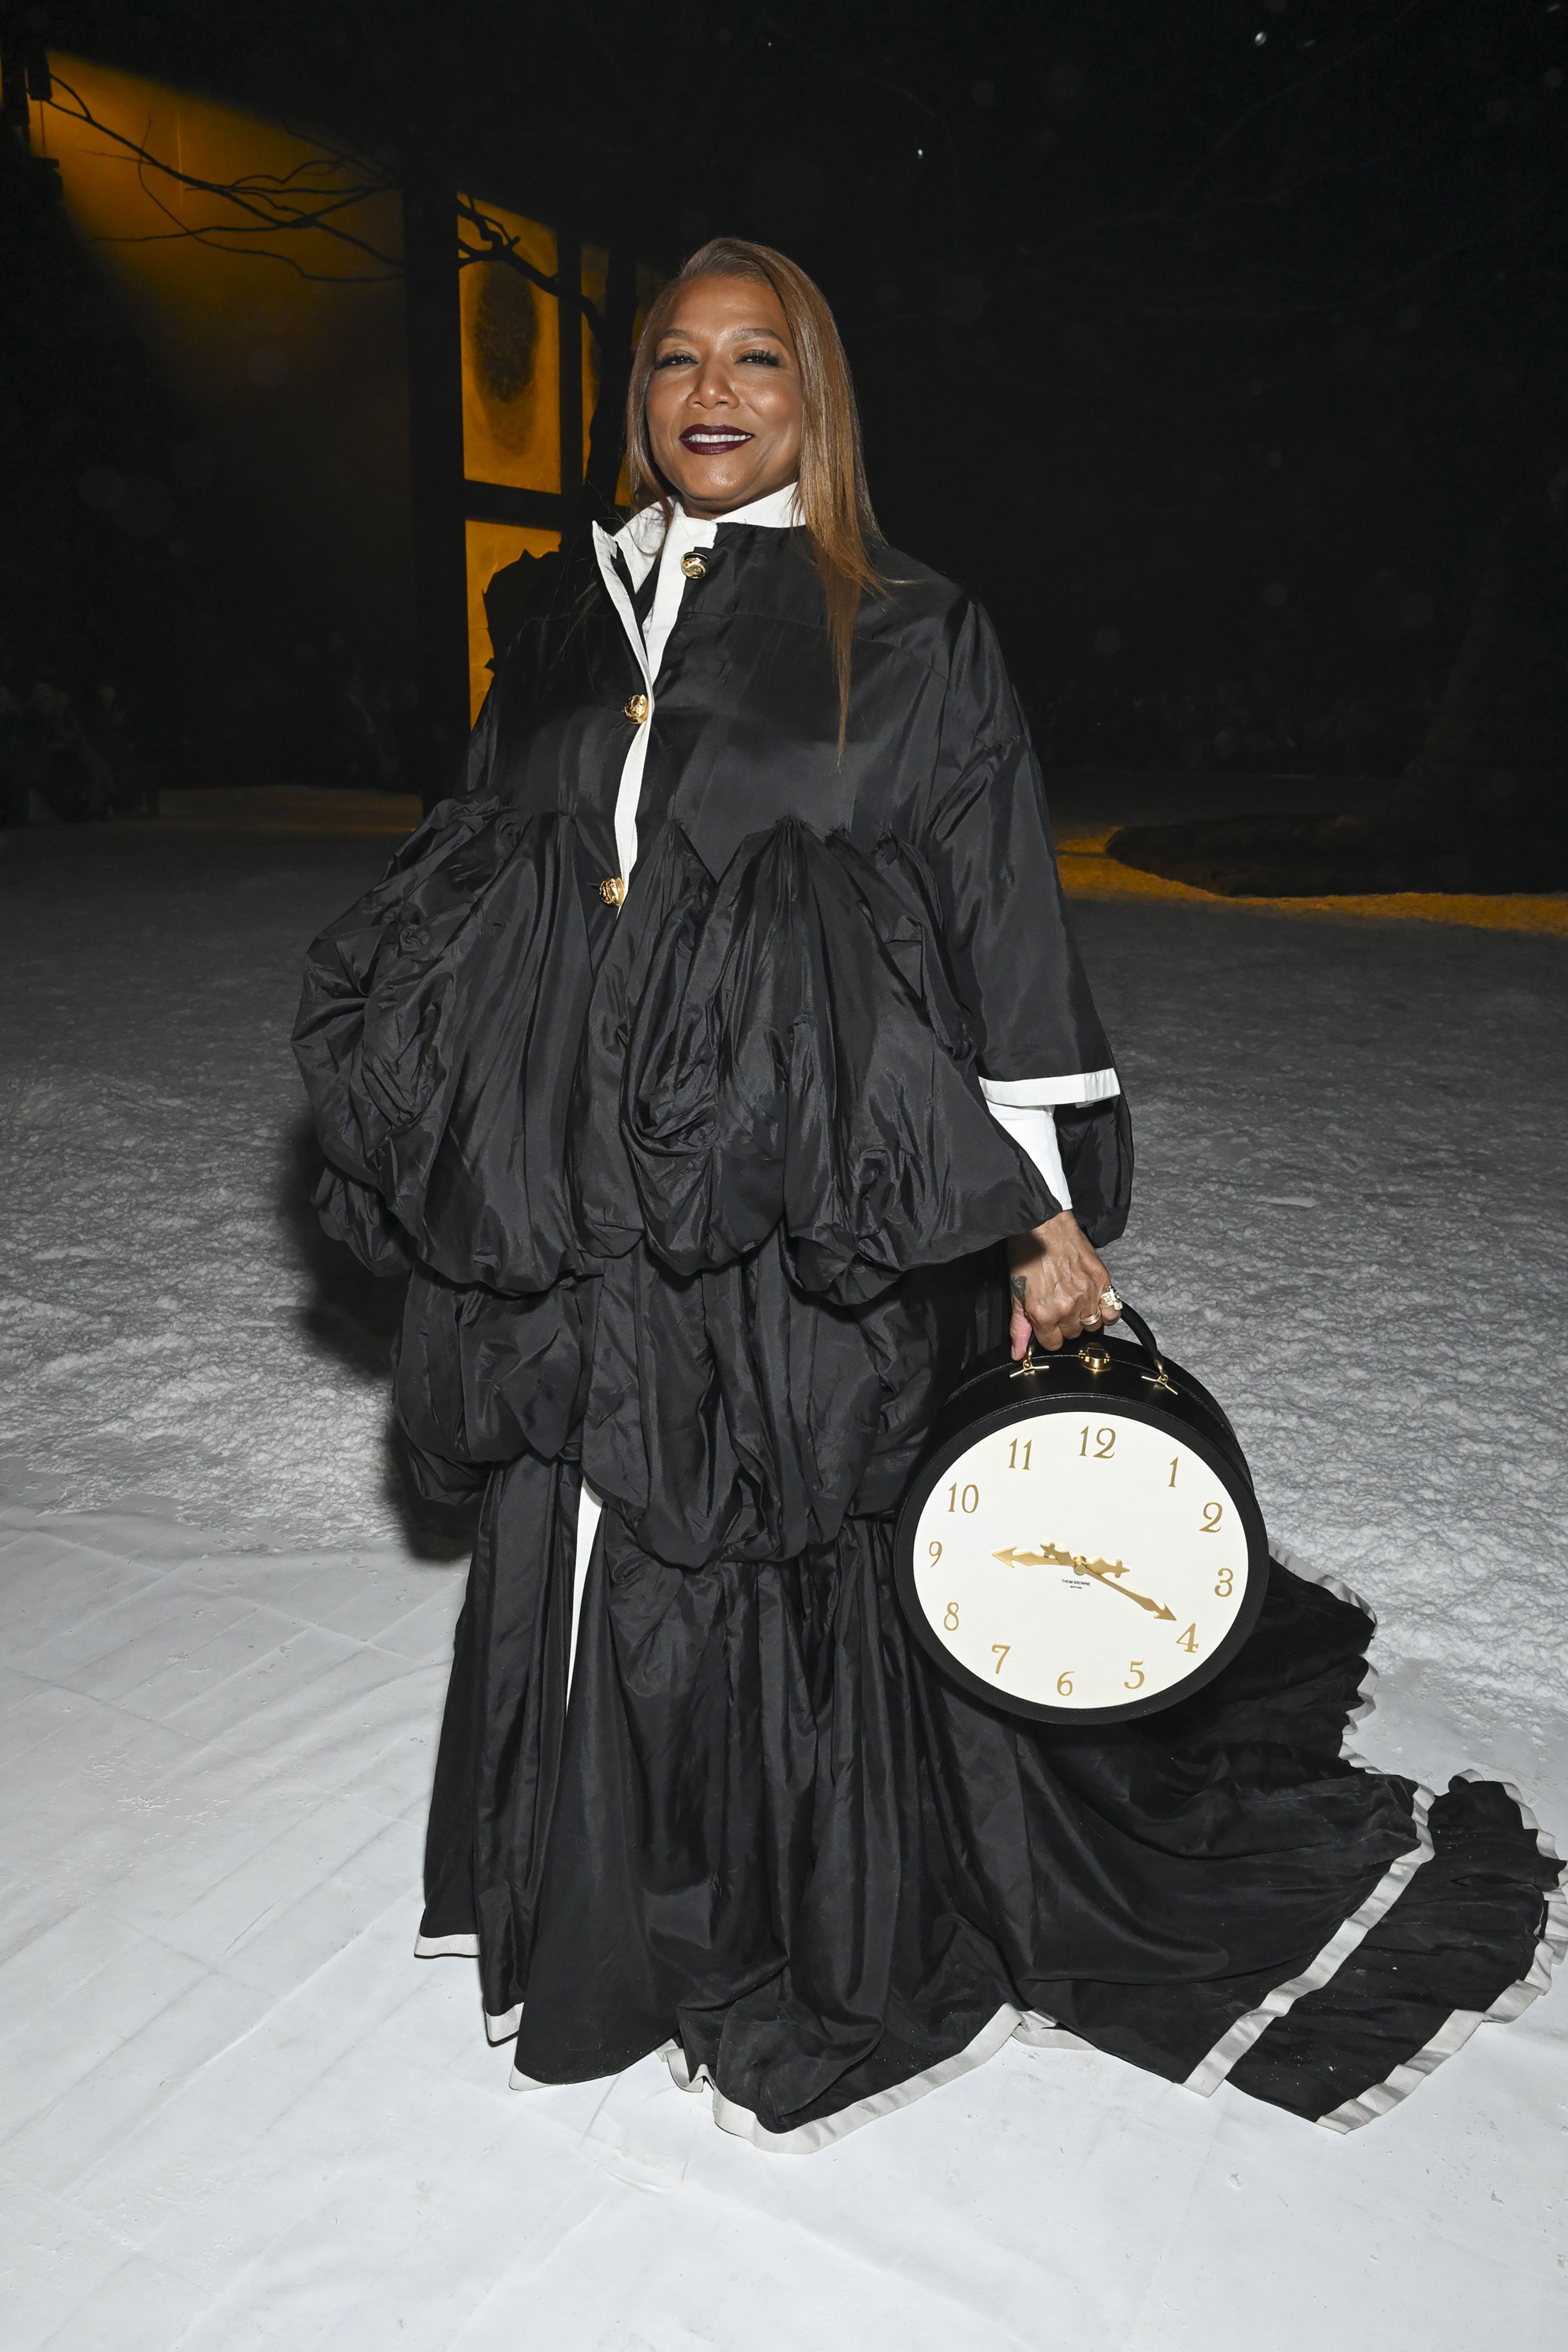 Queen Latifah attends the Thom Browne runway show on February 14.